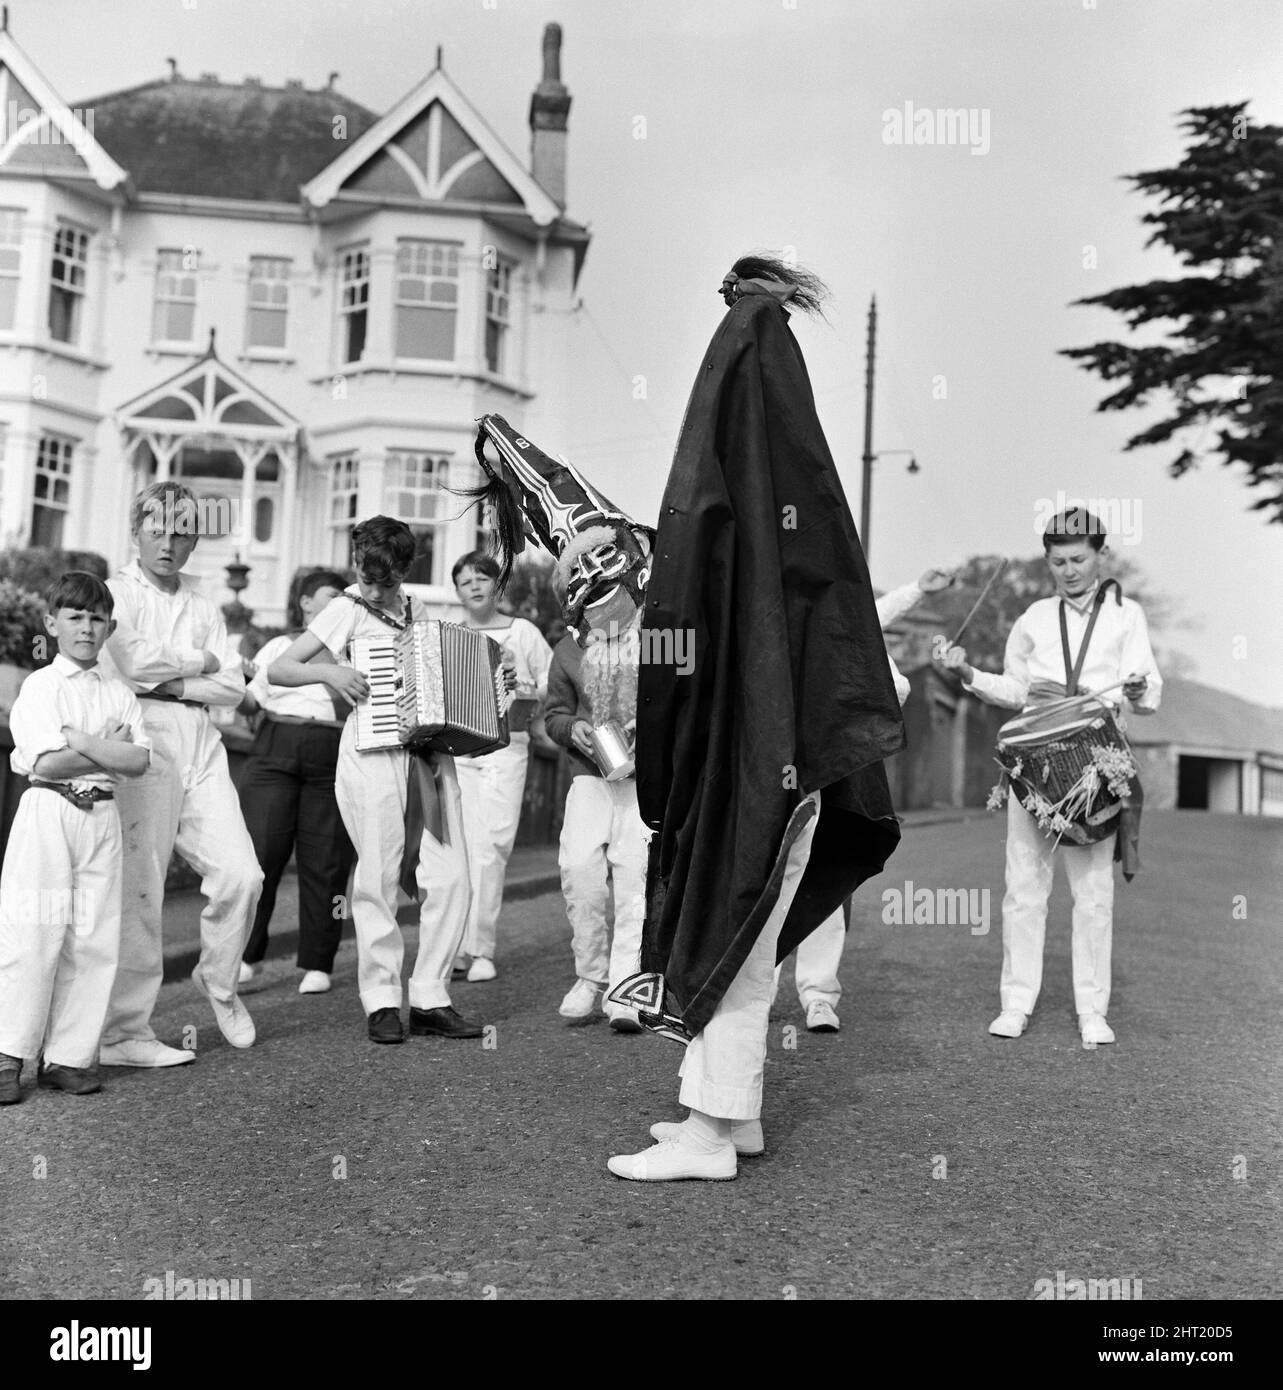 Visitors and townsfolk and Cornish exiles who return every year take part in the 36 hour festivities at the Padstow 'Obby ¿s celebrations to herald in the month of May with ancient rights of spring. 2nd May 1966. Stock Photo